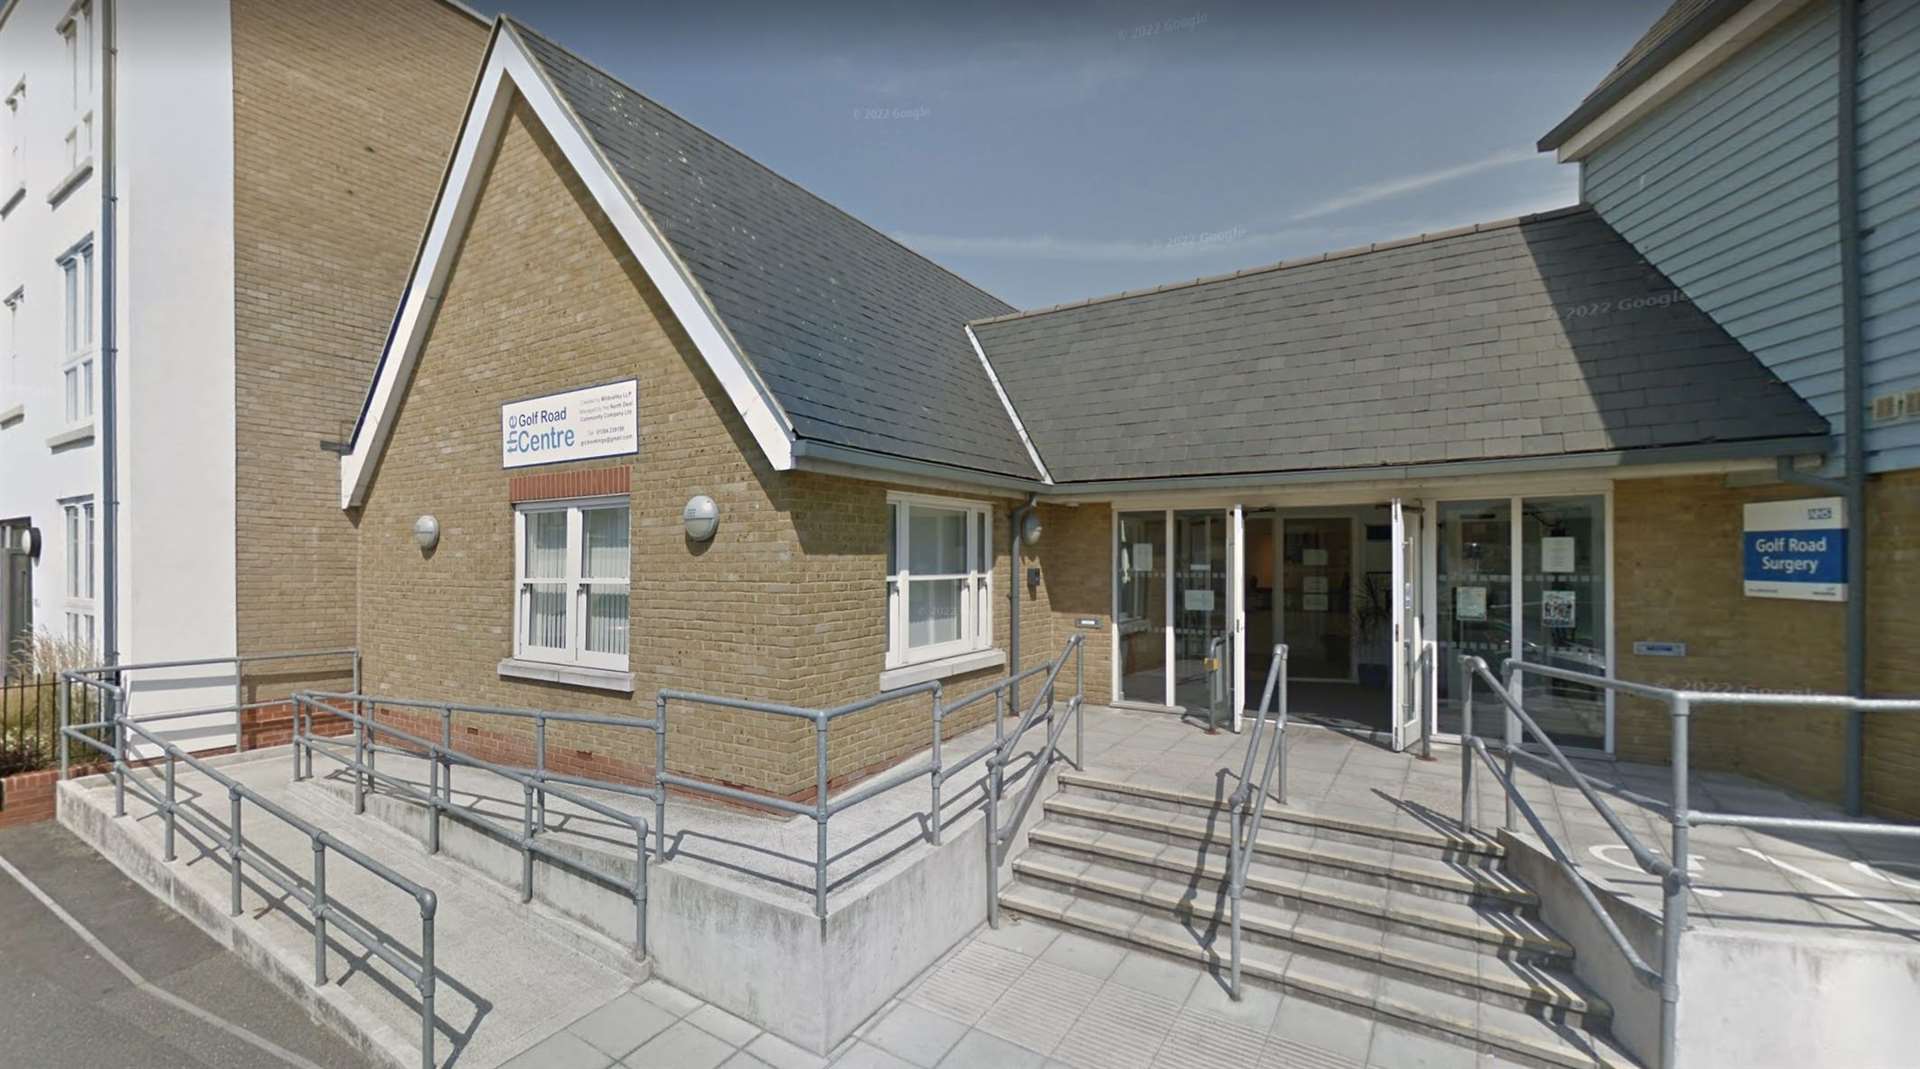 Golf Road Surgery in Deal. Picture: Google Street View